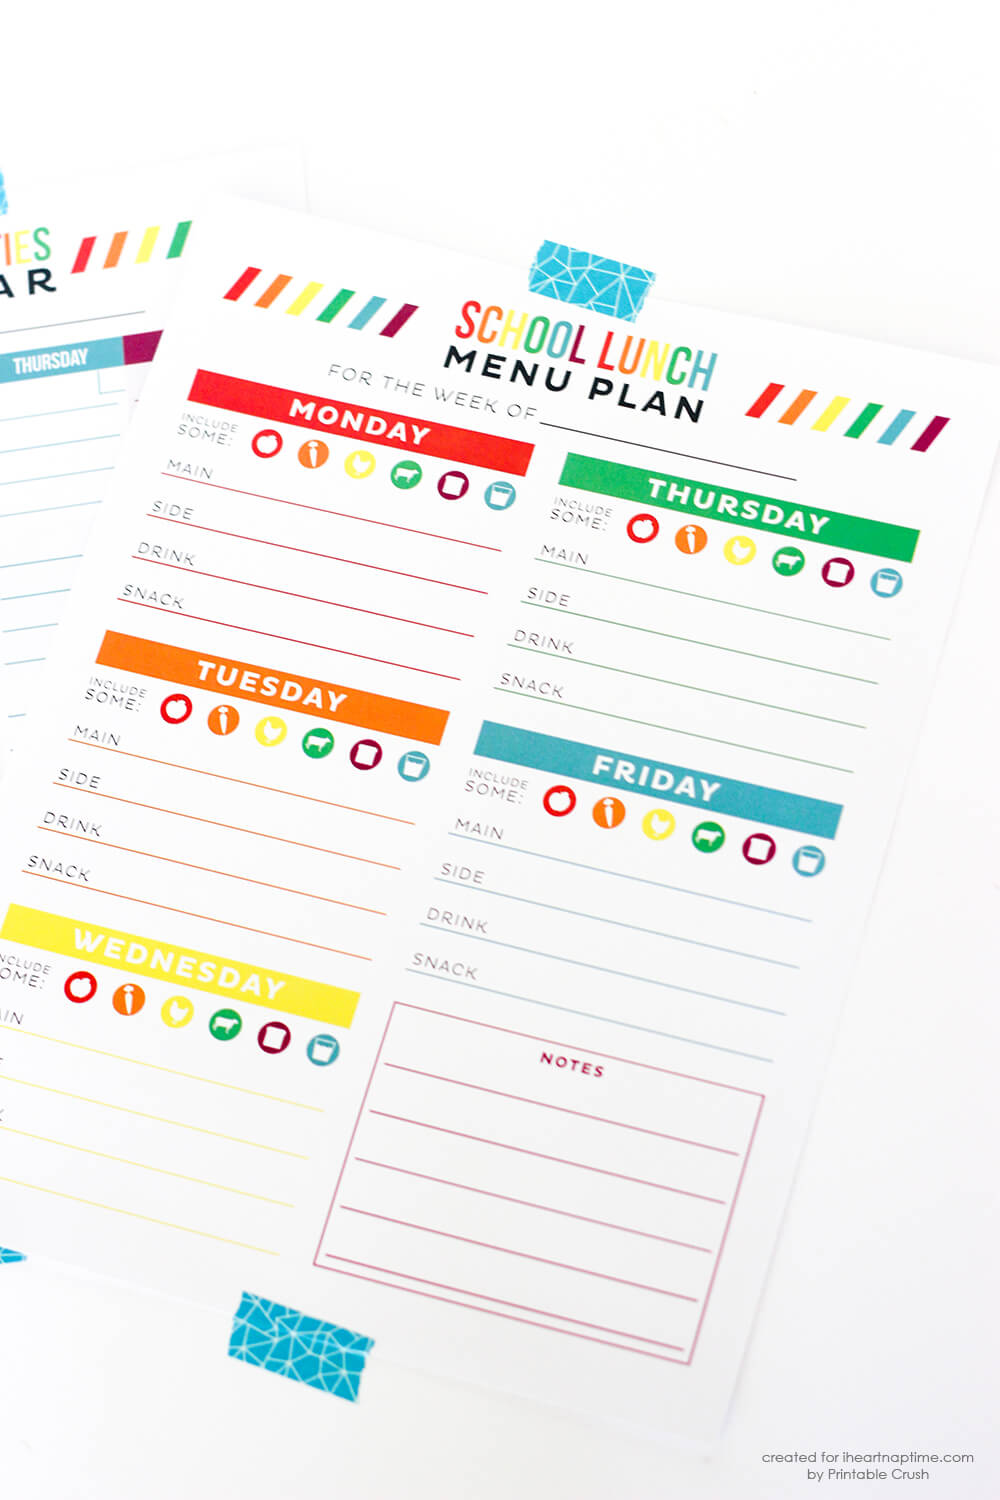 Print out these FREE School Organization Printables to help you stay organized this school year!